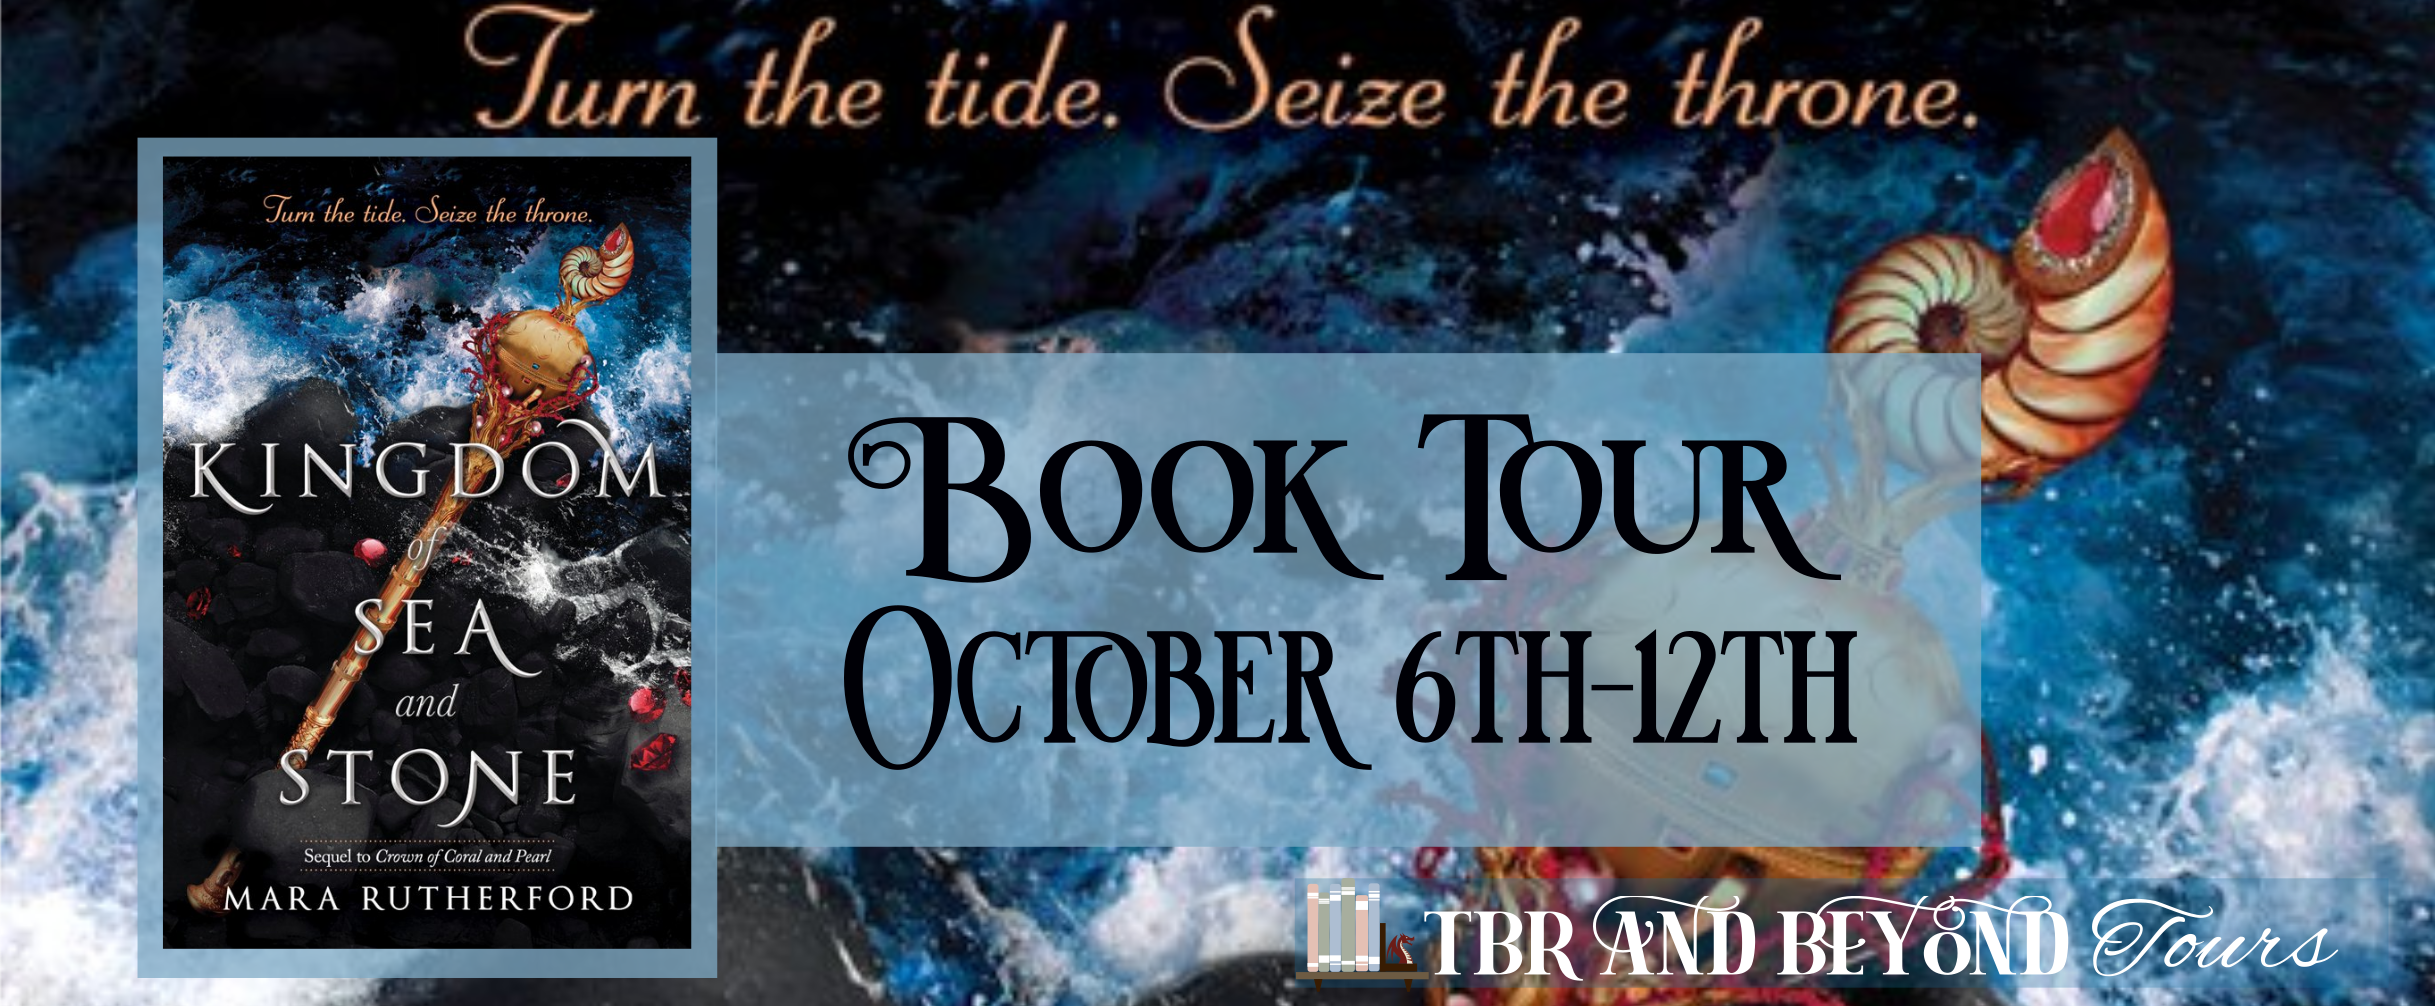 Blog Tour: Kingdom of Sea and Stone by Mara Rutherford (Creative Post + Giveaway!)